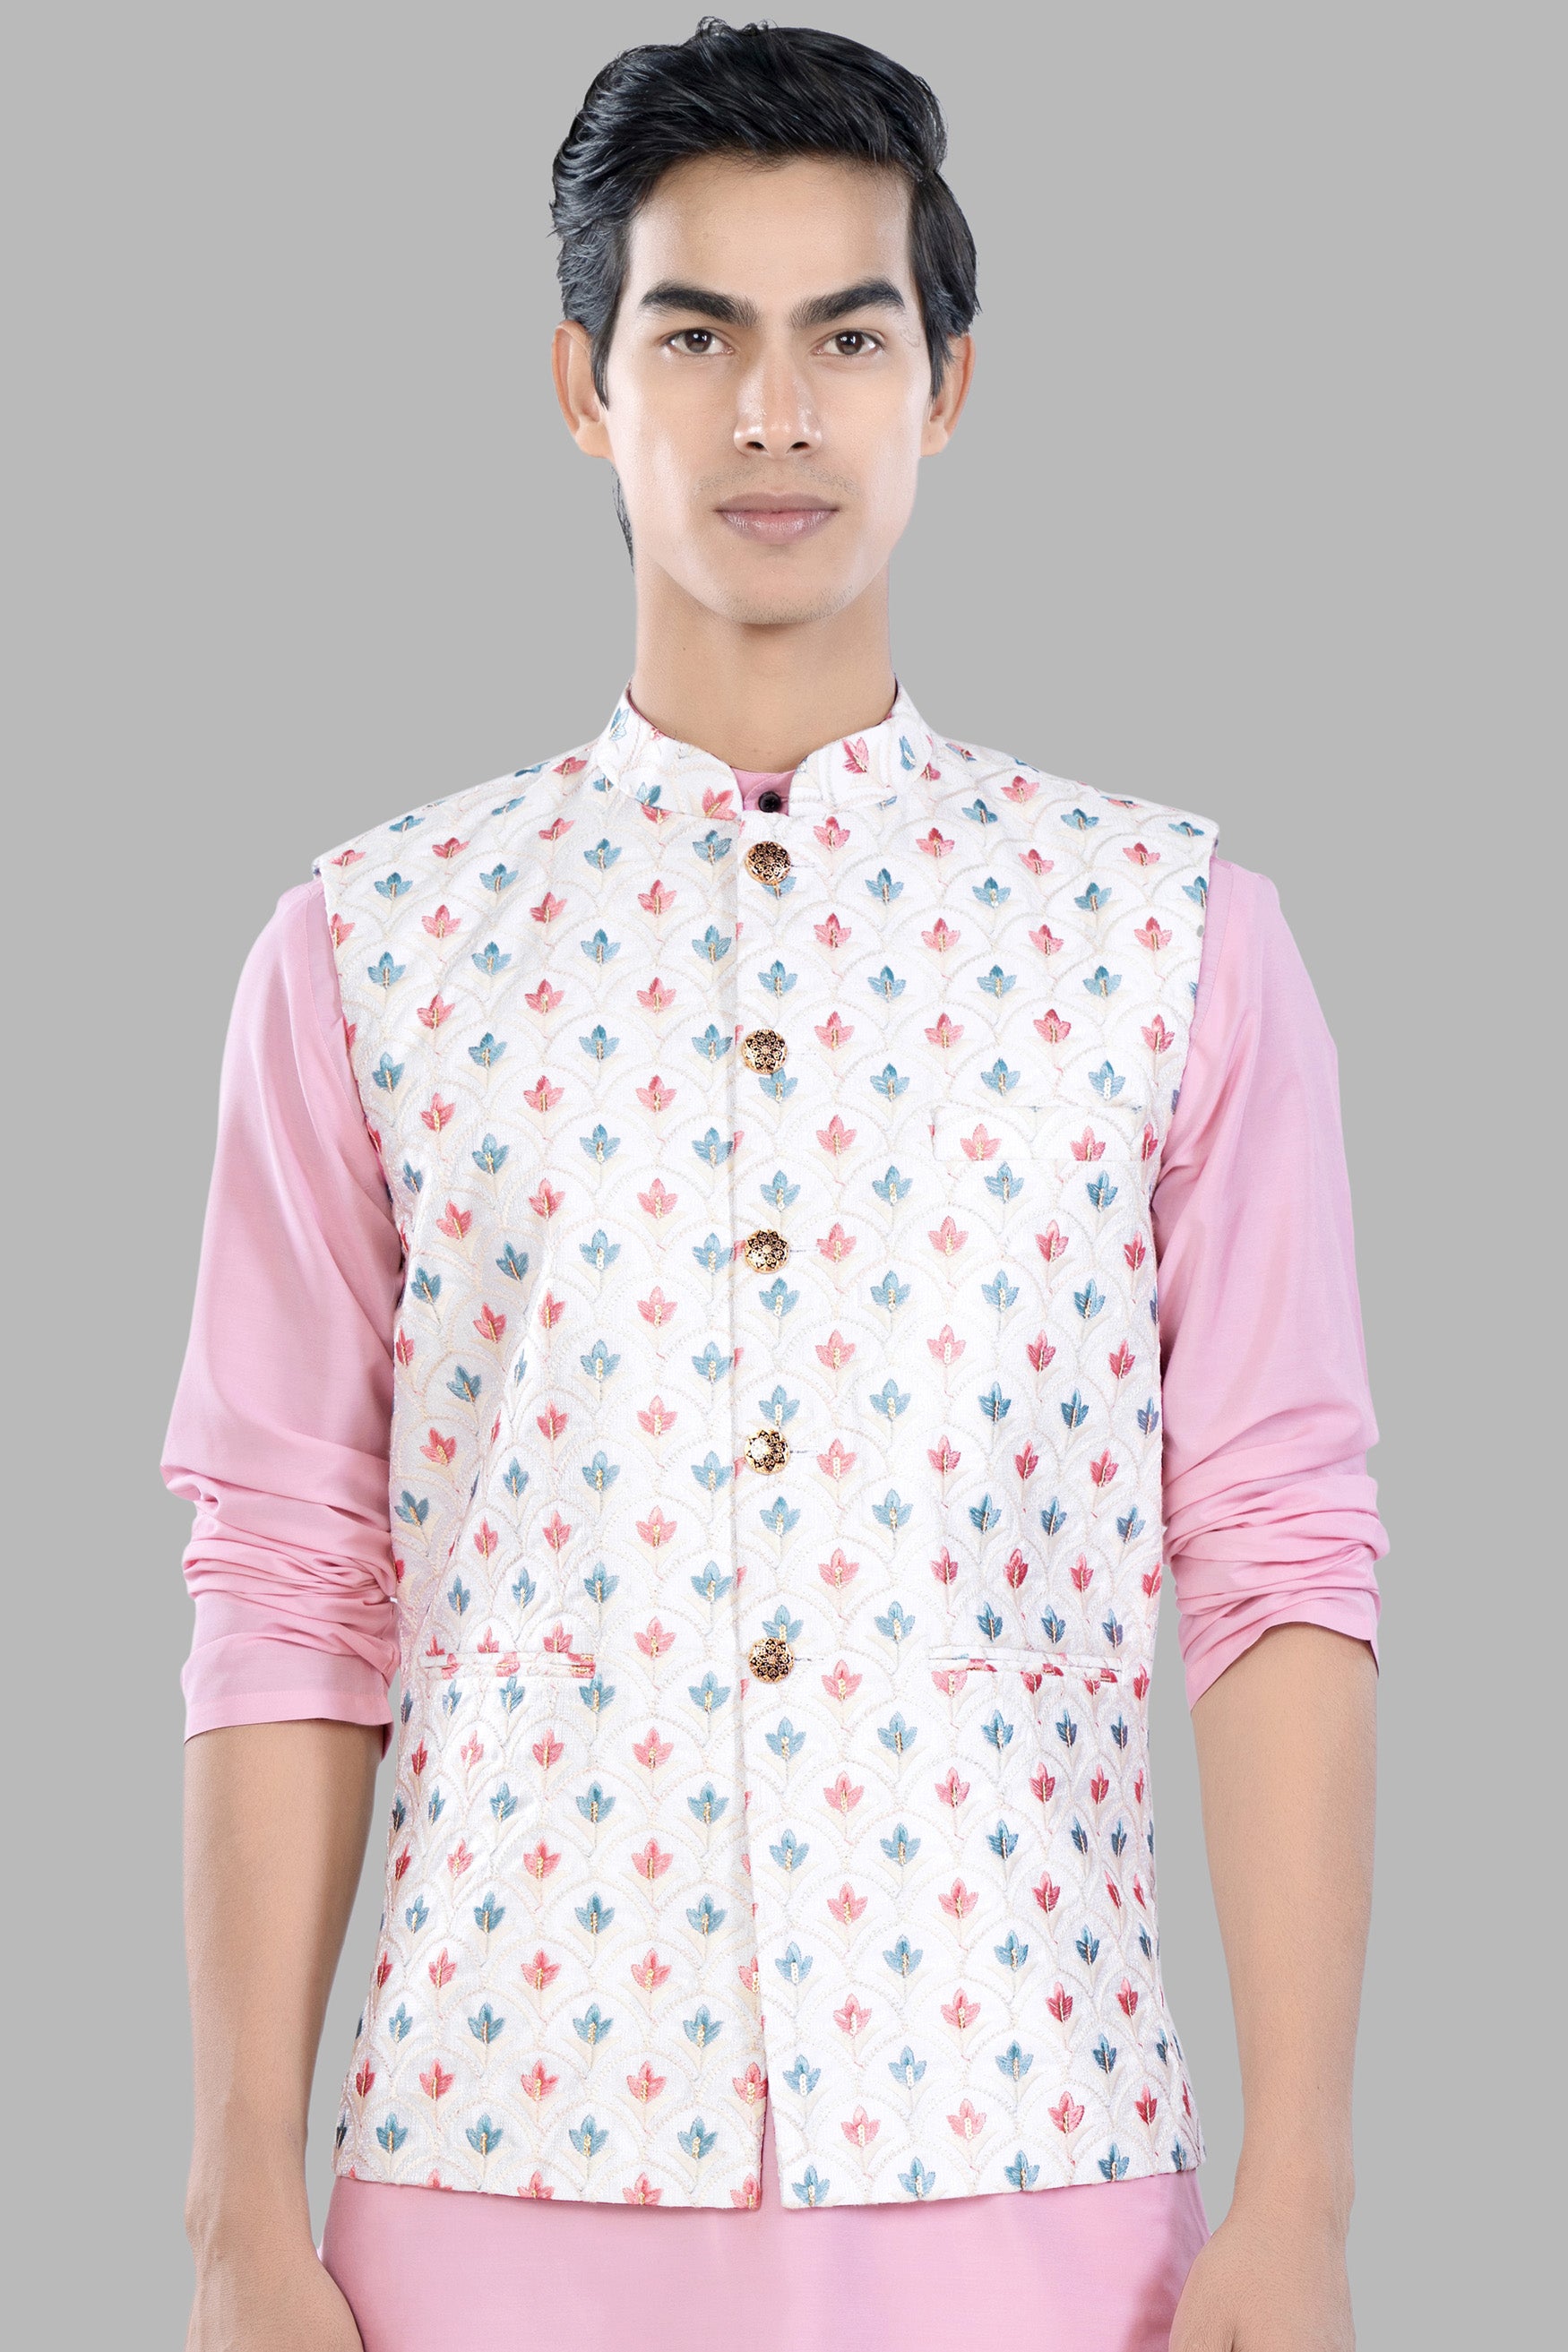 Bright White and Carnation Pink Leaves Thread Embroidered Designer Nehru Jacket WC3468-36,  WC3468-38,  WC3468-40,  WC3468-42,  WC3468-44,  WC3468-46,  WC3468-48,  WC3468-50,  WC3468-52,  WC3468-54,  WC3468-56,  WC3468-58,  WC3468-60